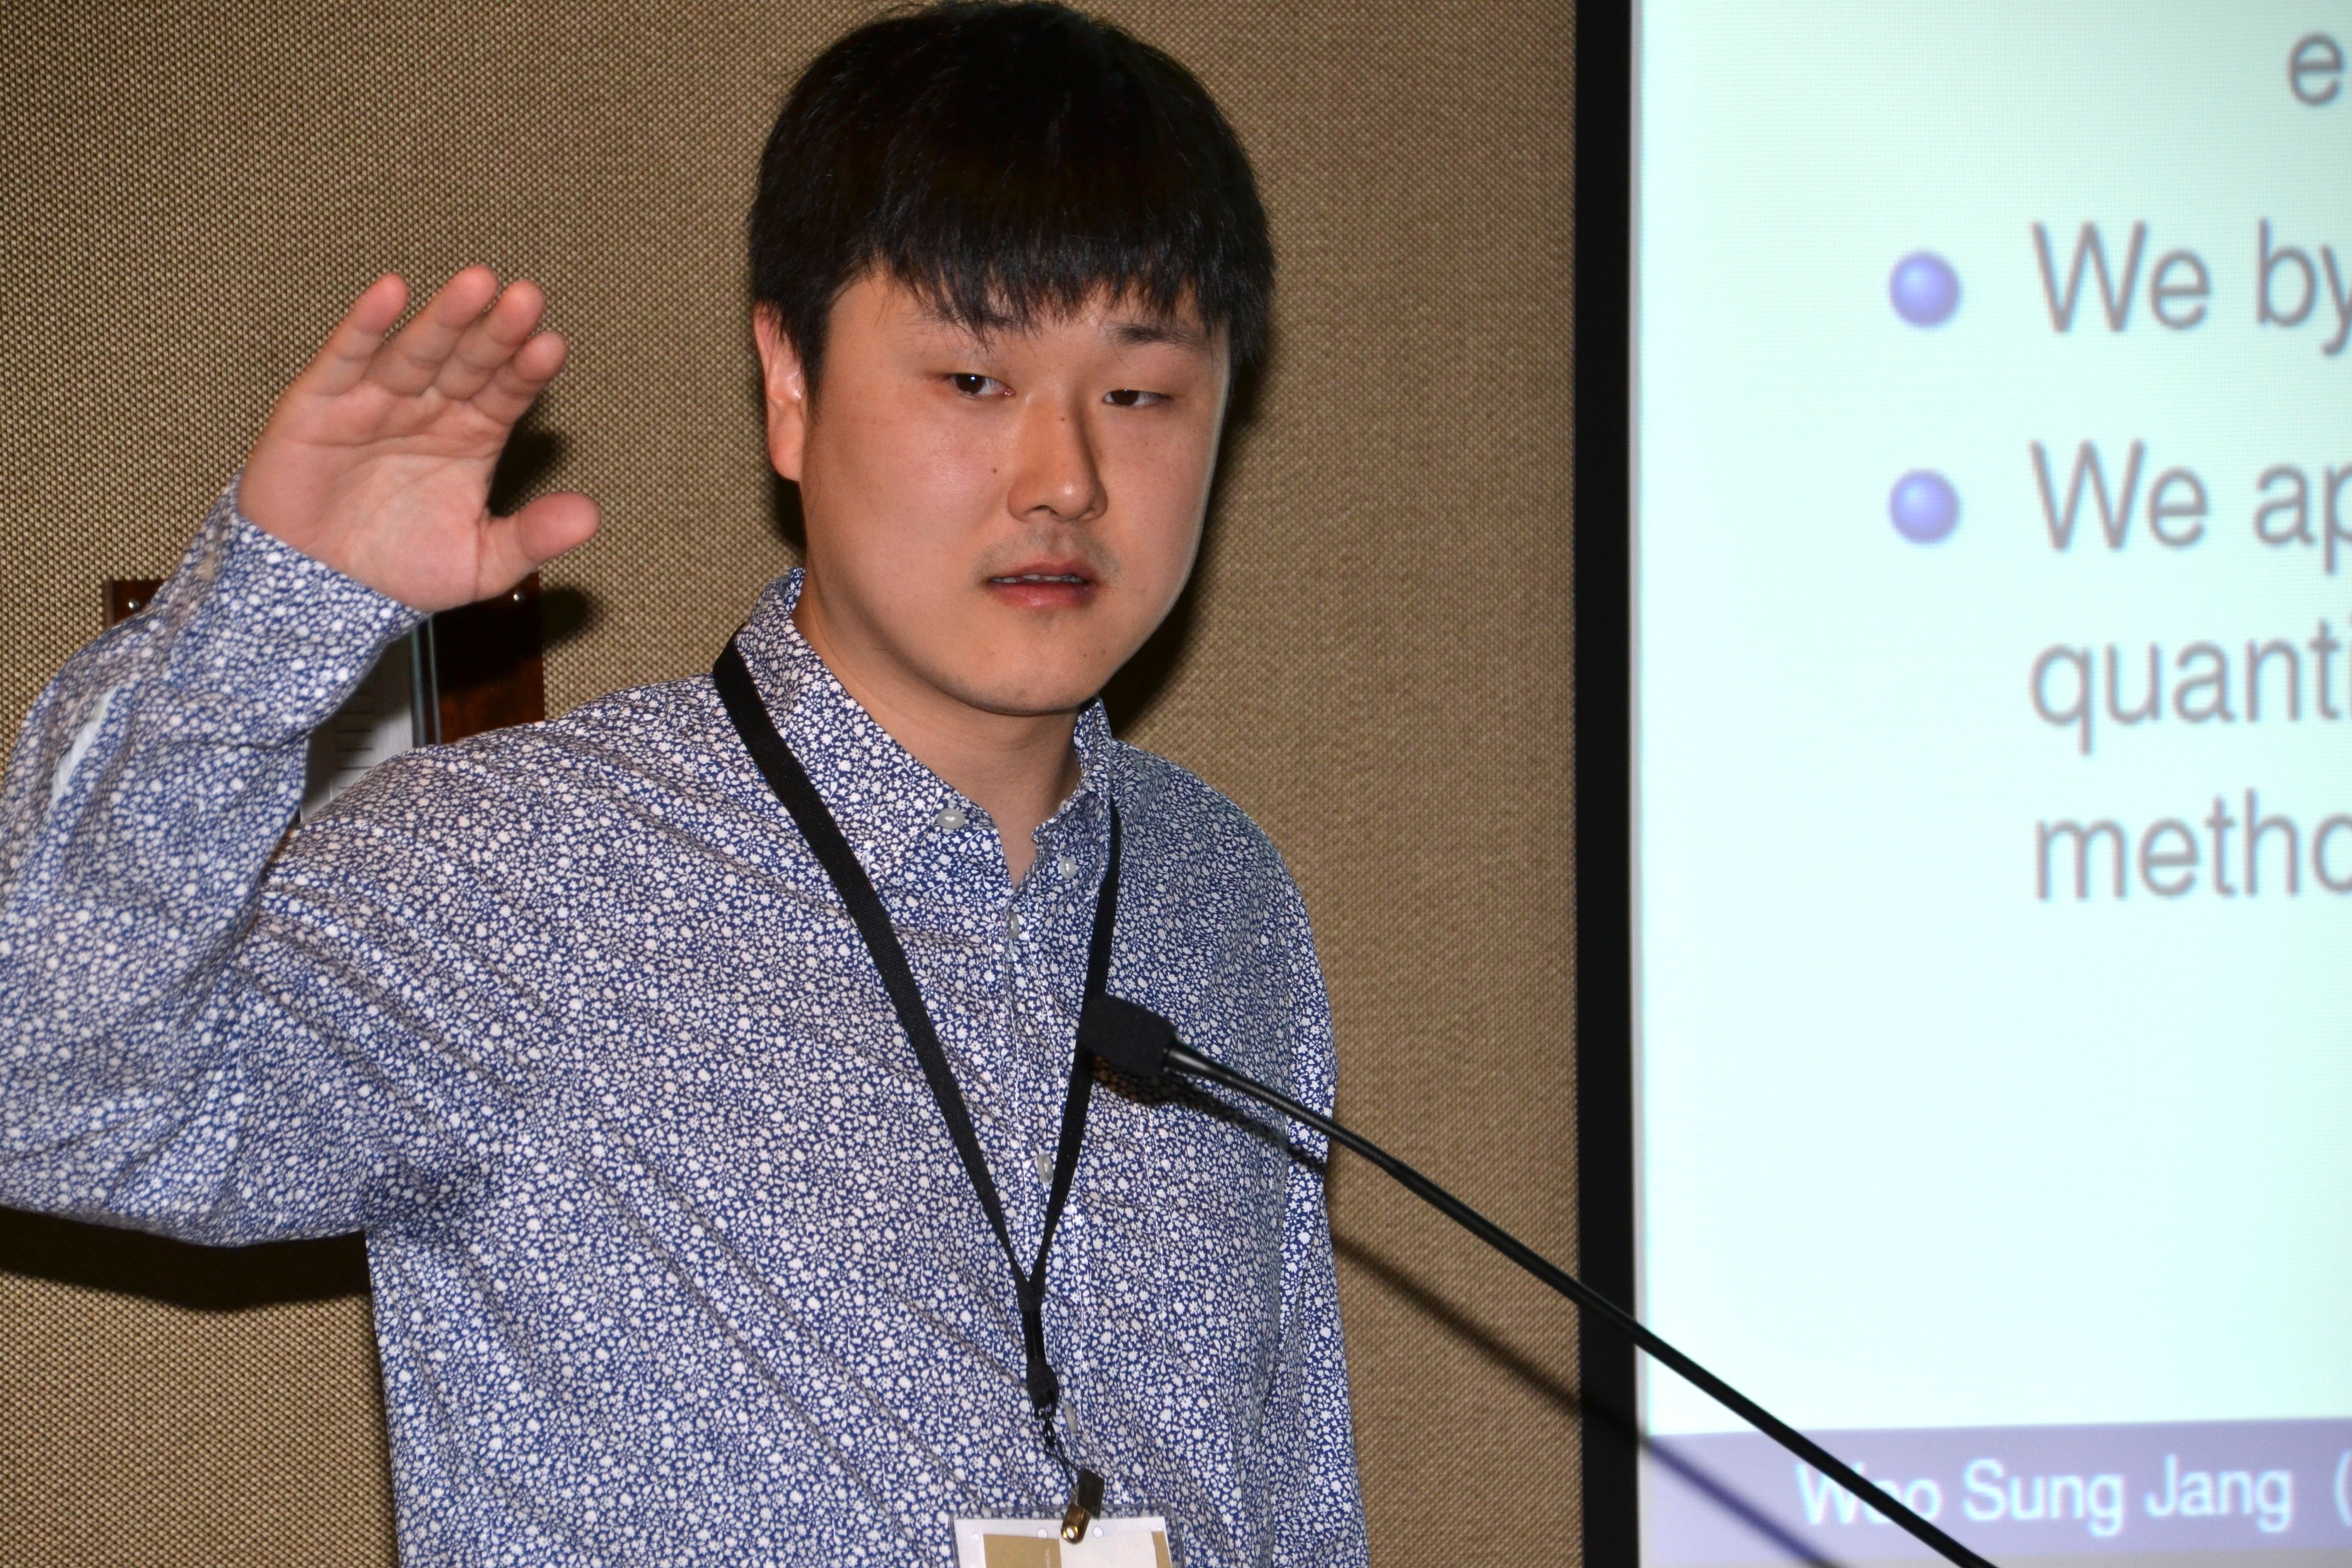 Woo Sung Jang of SAS Institute presents in a computer technology workshop titled Bayesian Nonparametrics, U-Statistics, Saddle Point, and Quantile Model: A Semiparametric Bayesian Approach for Quantile Regression with Clustered Data.